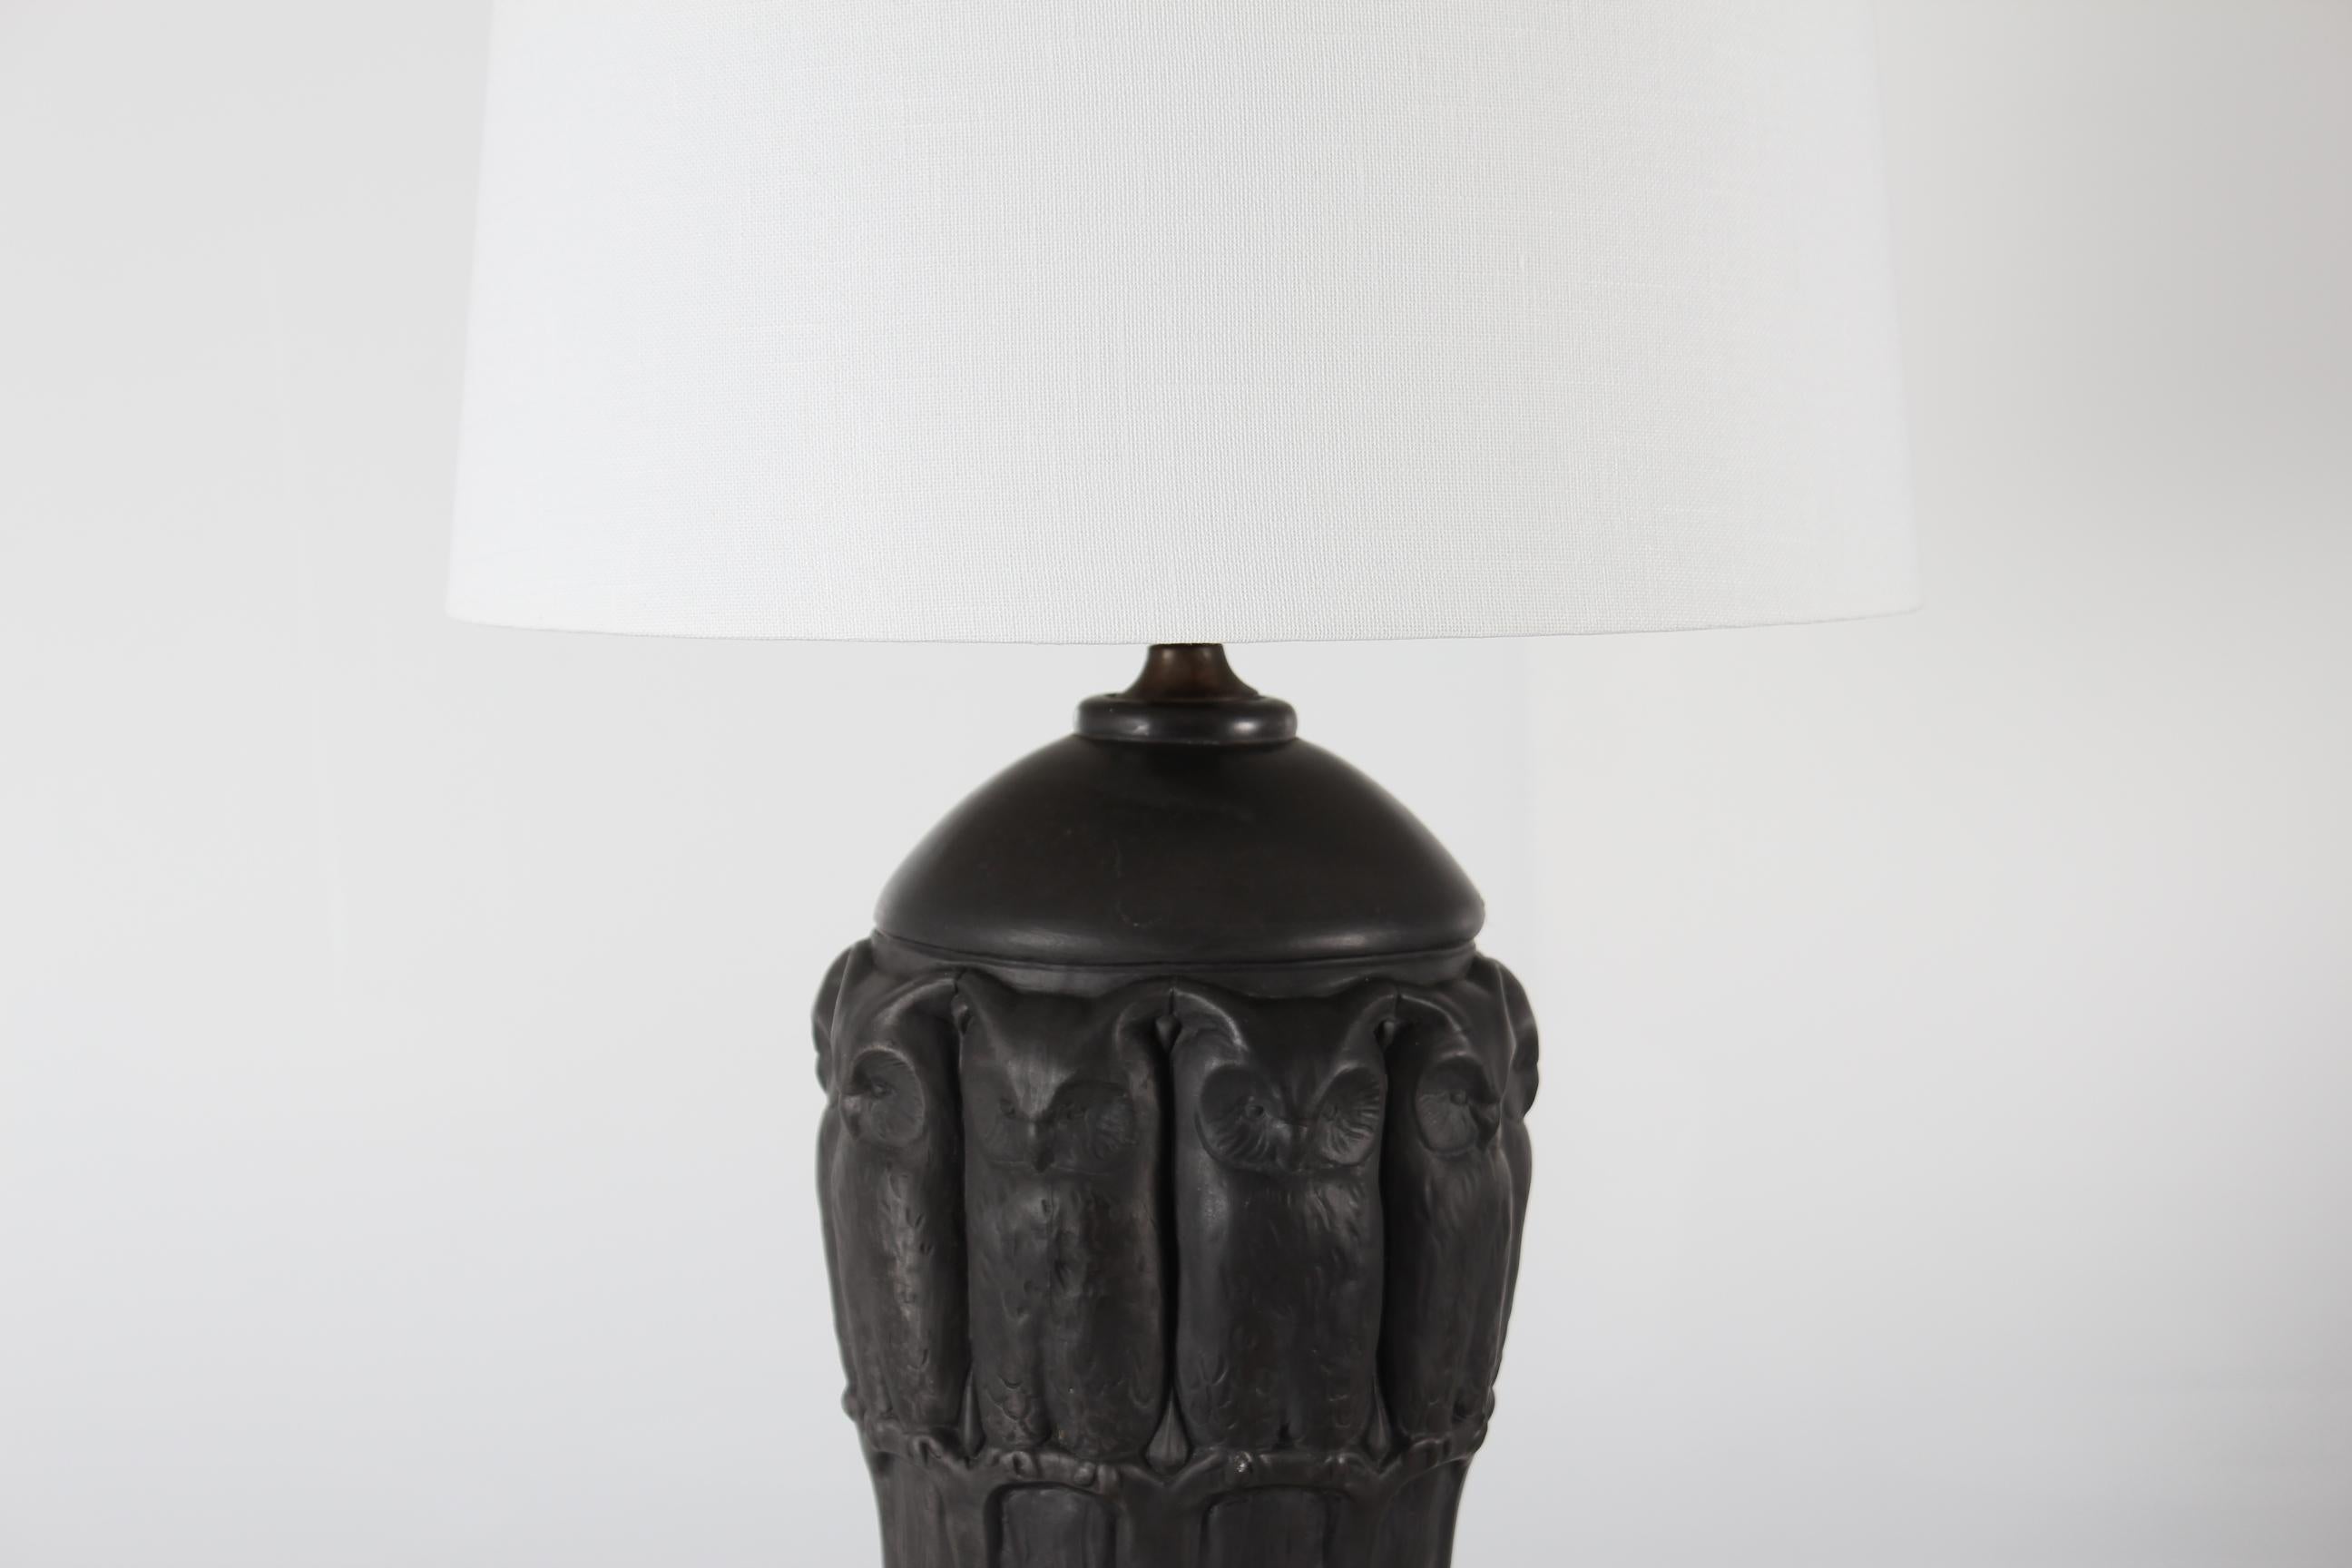 Art Nouveau table lamp from the Danish ceramic studio L. Hjorth on the island of Bornholm.
The Lamp base is made of black terracotta with owl decoration model no. 653.

Included is a new quality lampshade designed and made in Denmark. It´s made of